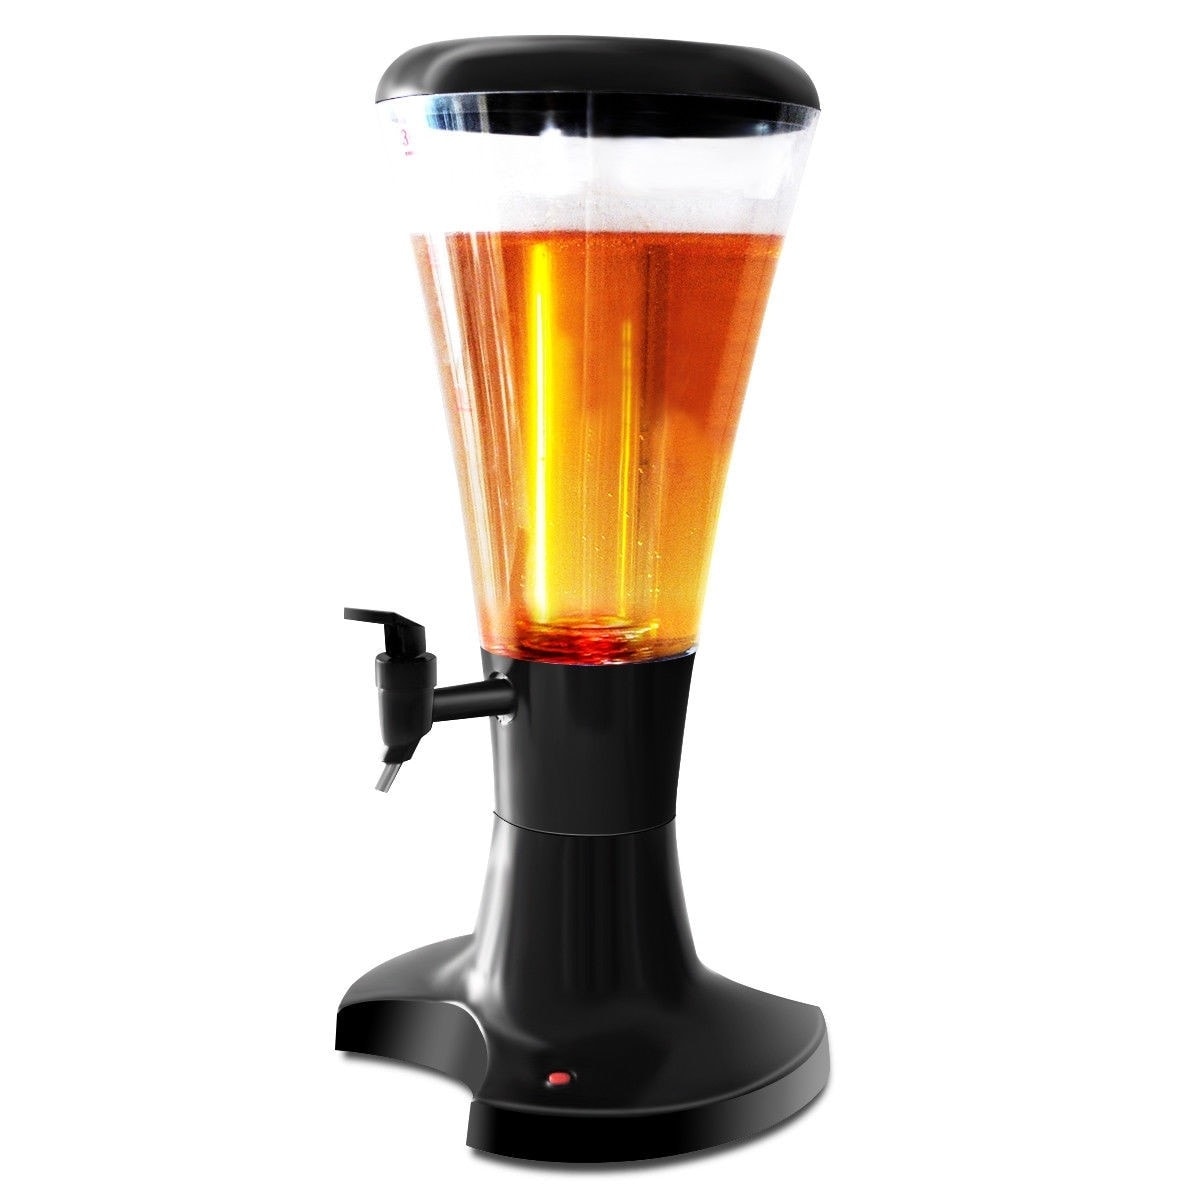 https://ak1.ostkcdn.com/images/products/is/images/direct/1aa326e229de8d97d8df23b961f166cad1aa8063/3L-Draft-Beer-Tower-Dispenser-with-LED-Lights.jpg